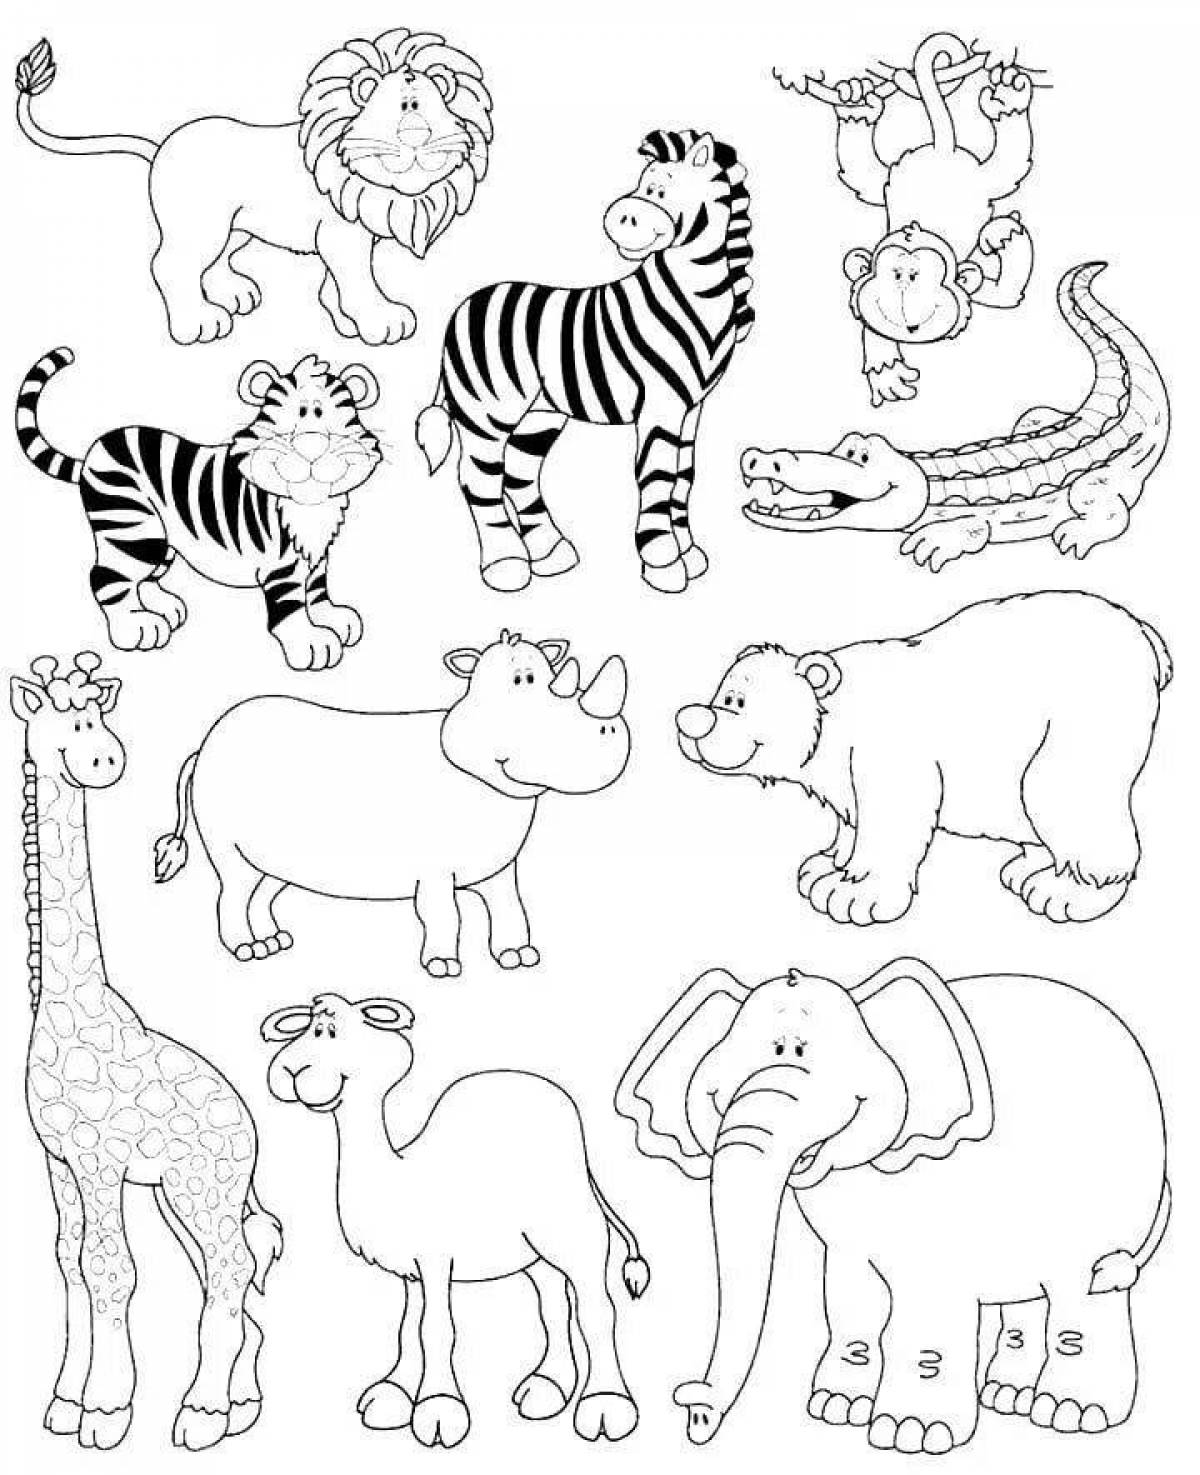 African animals coloring page for 6-7 year olds